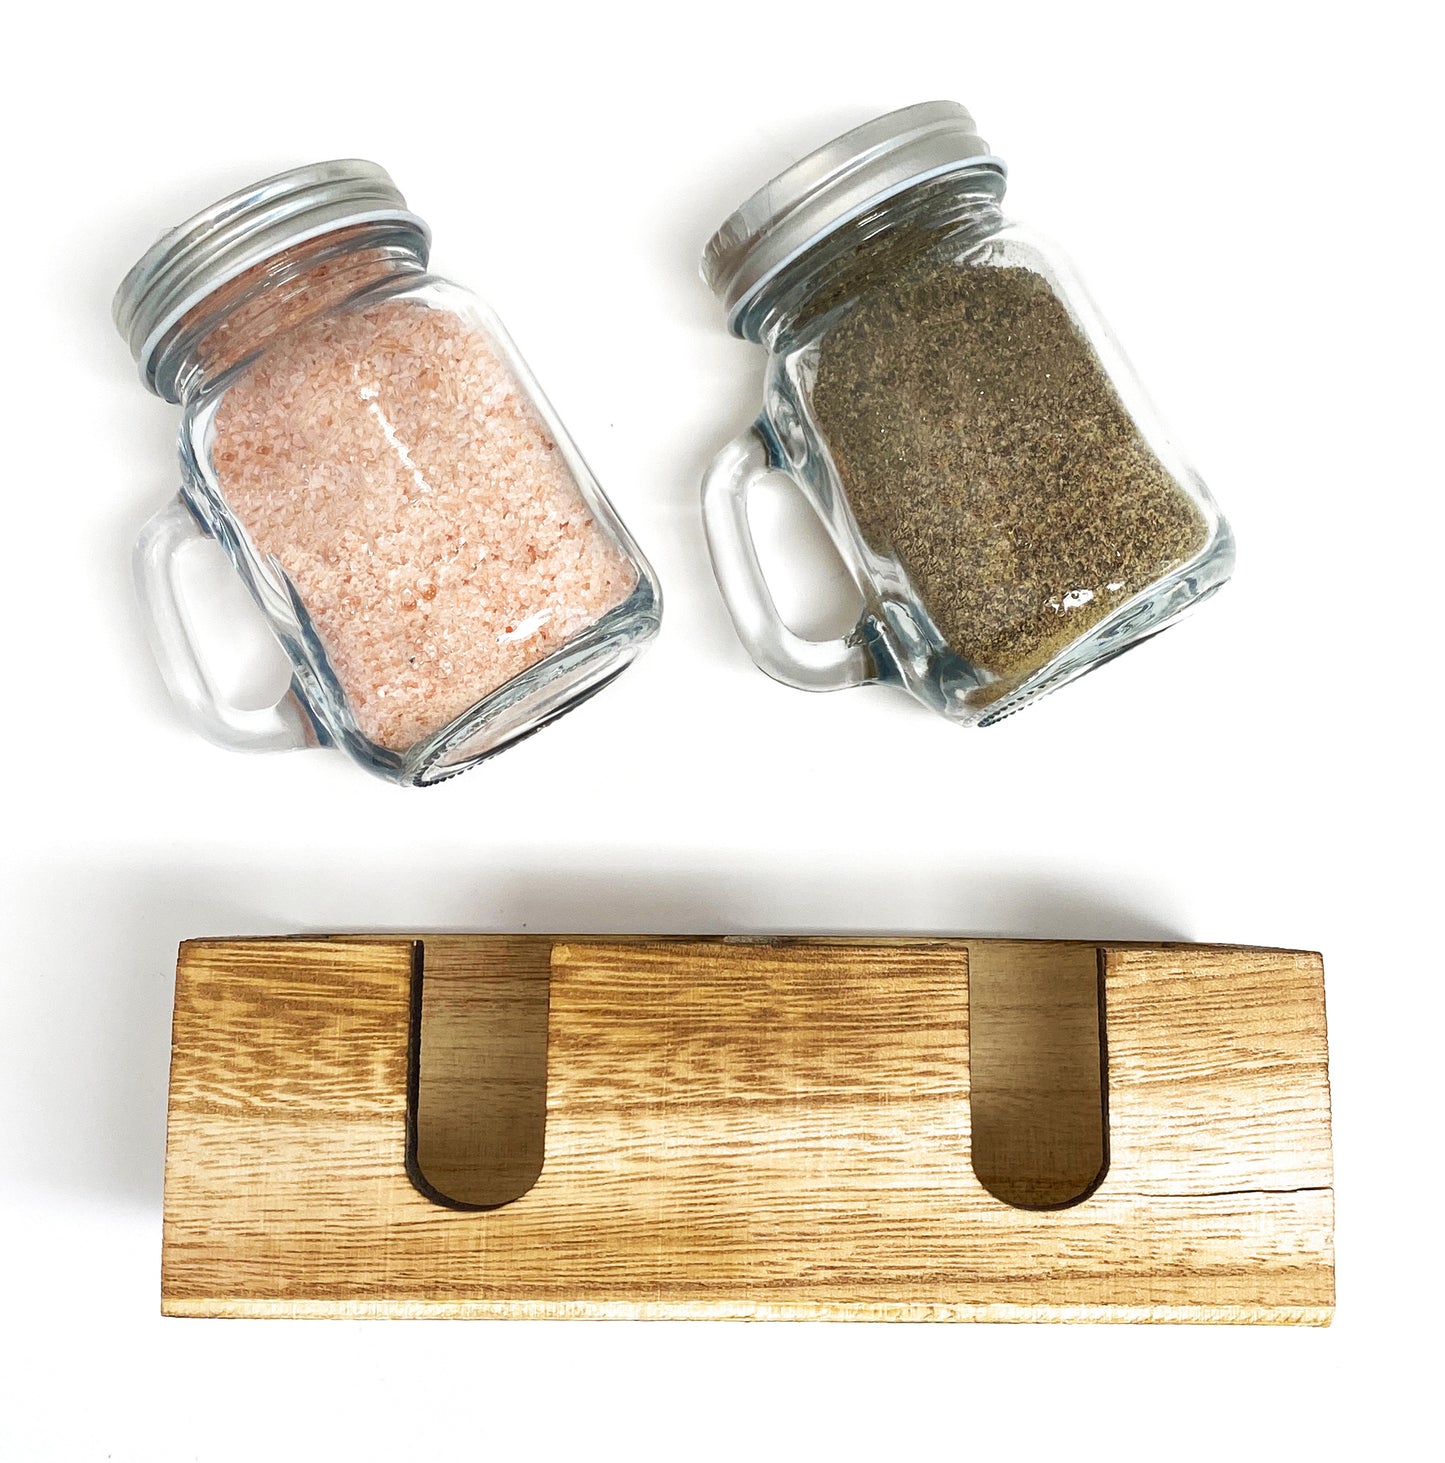 Mason Jar Salt and Pepper Shakers Set with Wood Caddy